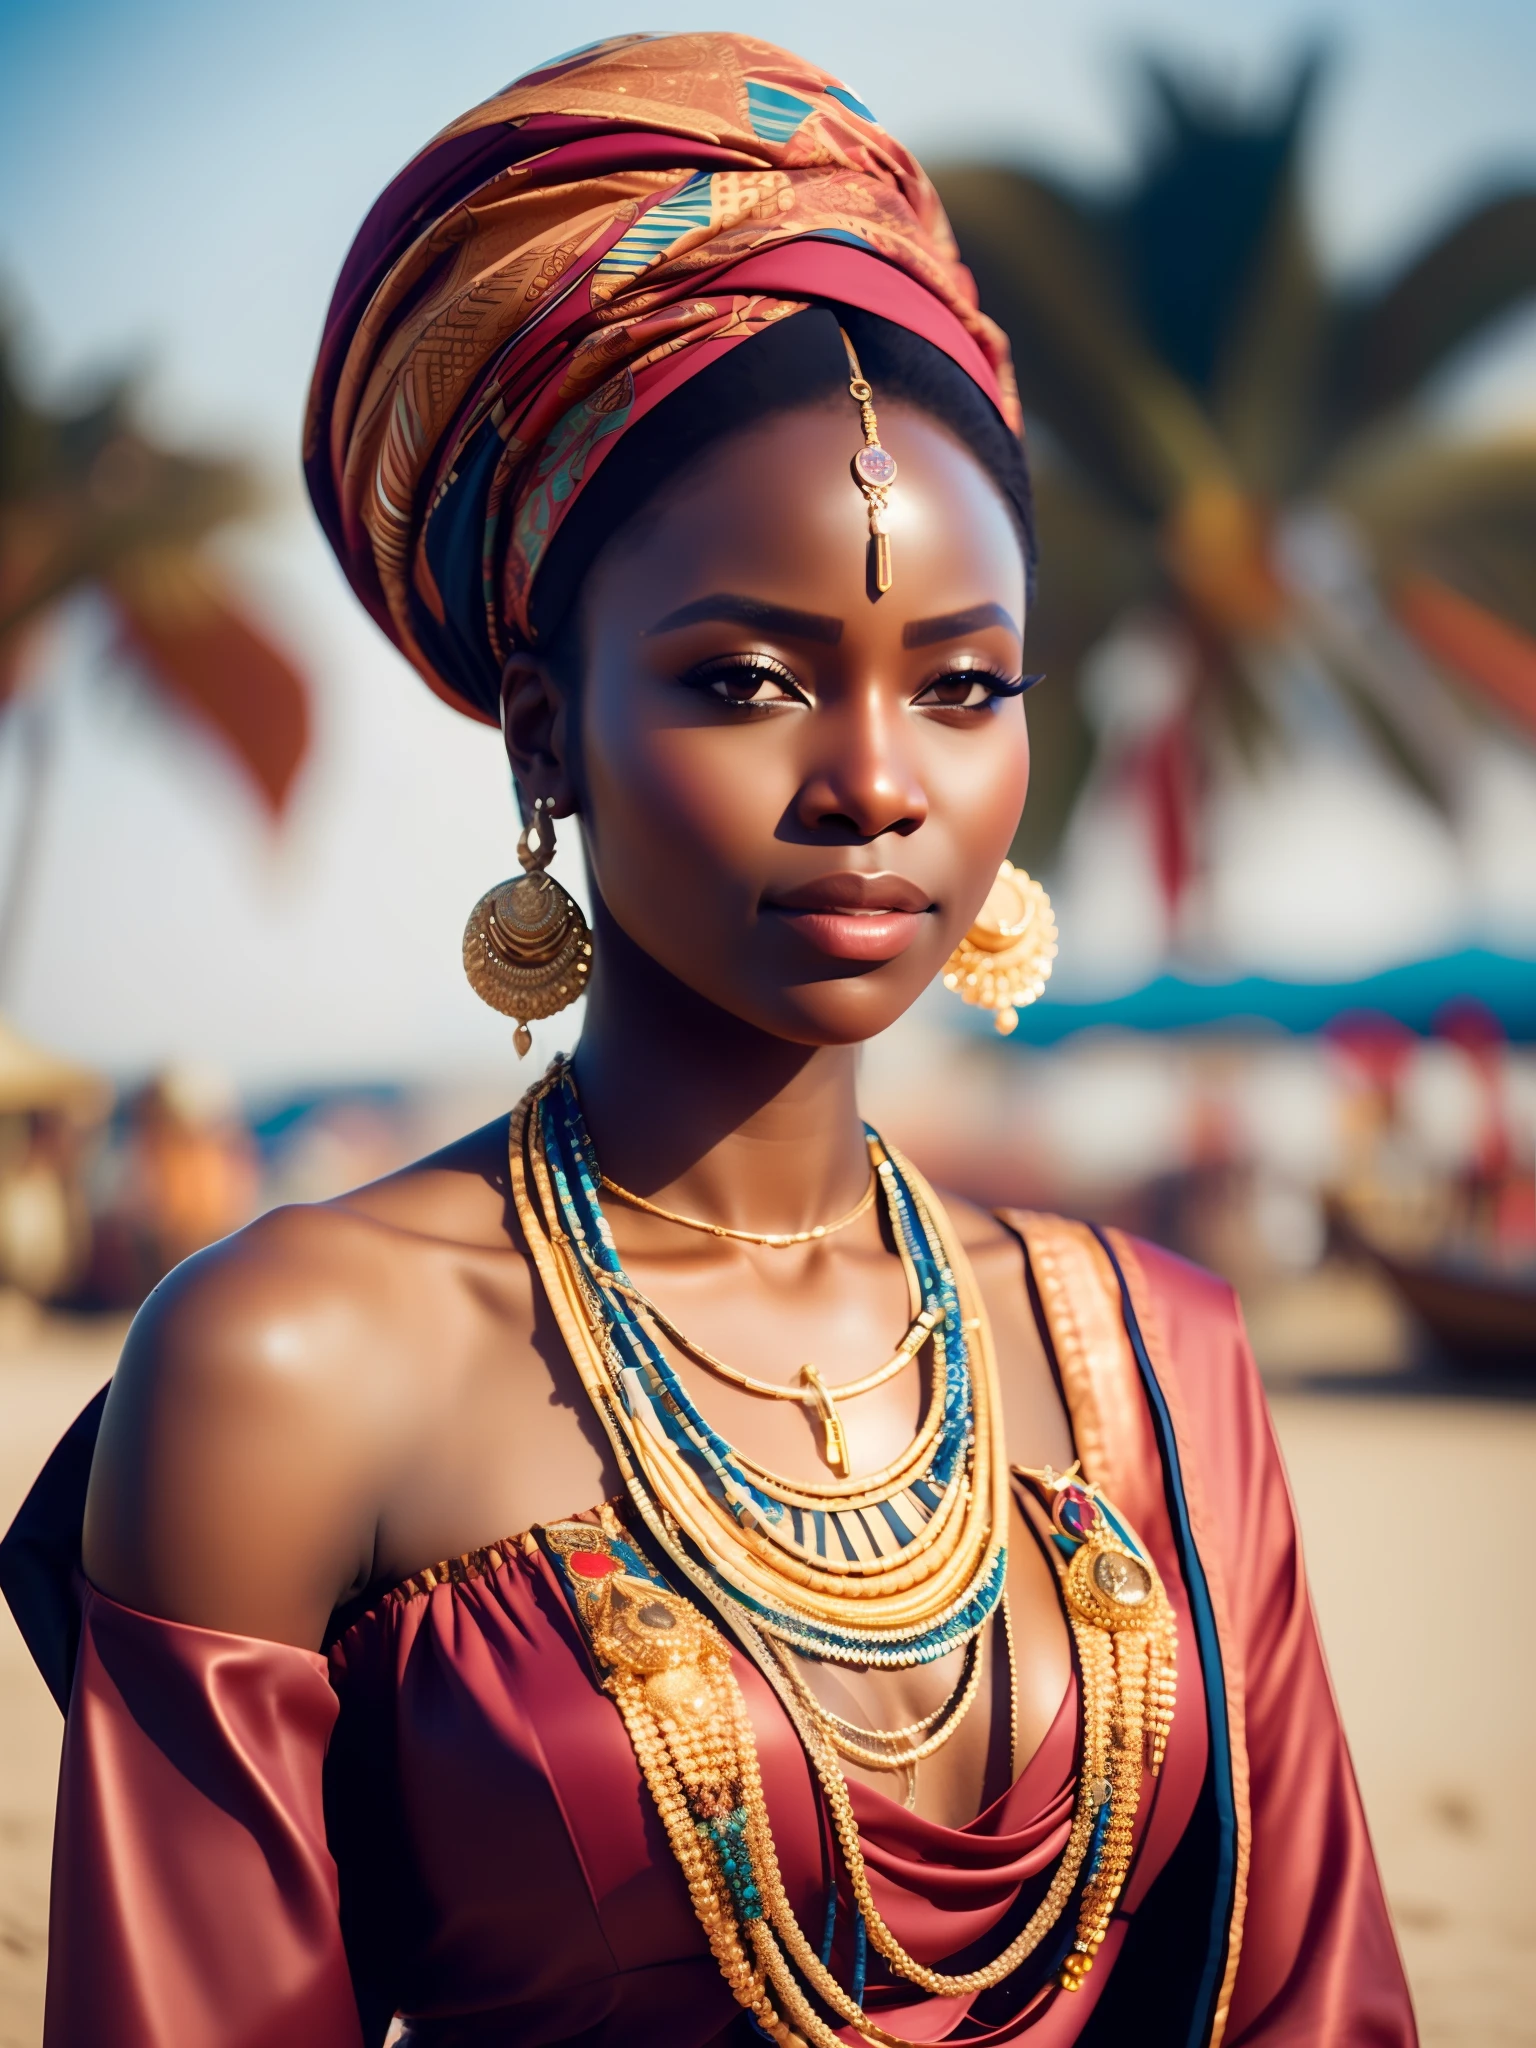 fking_scifi, fking_scifi_v2, portrait of a young very beautiful African woman, in front of a beach, rich colorful clothes, turban and golden african jewelry, close up, regal pose and attitude. fking_cinema_v2. fking_cinema_v2